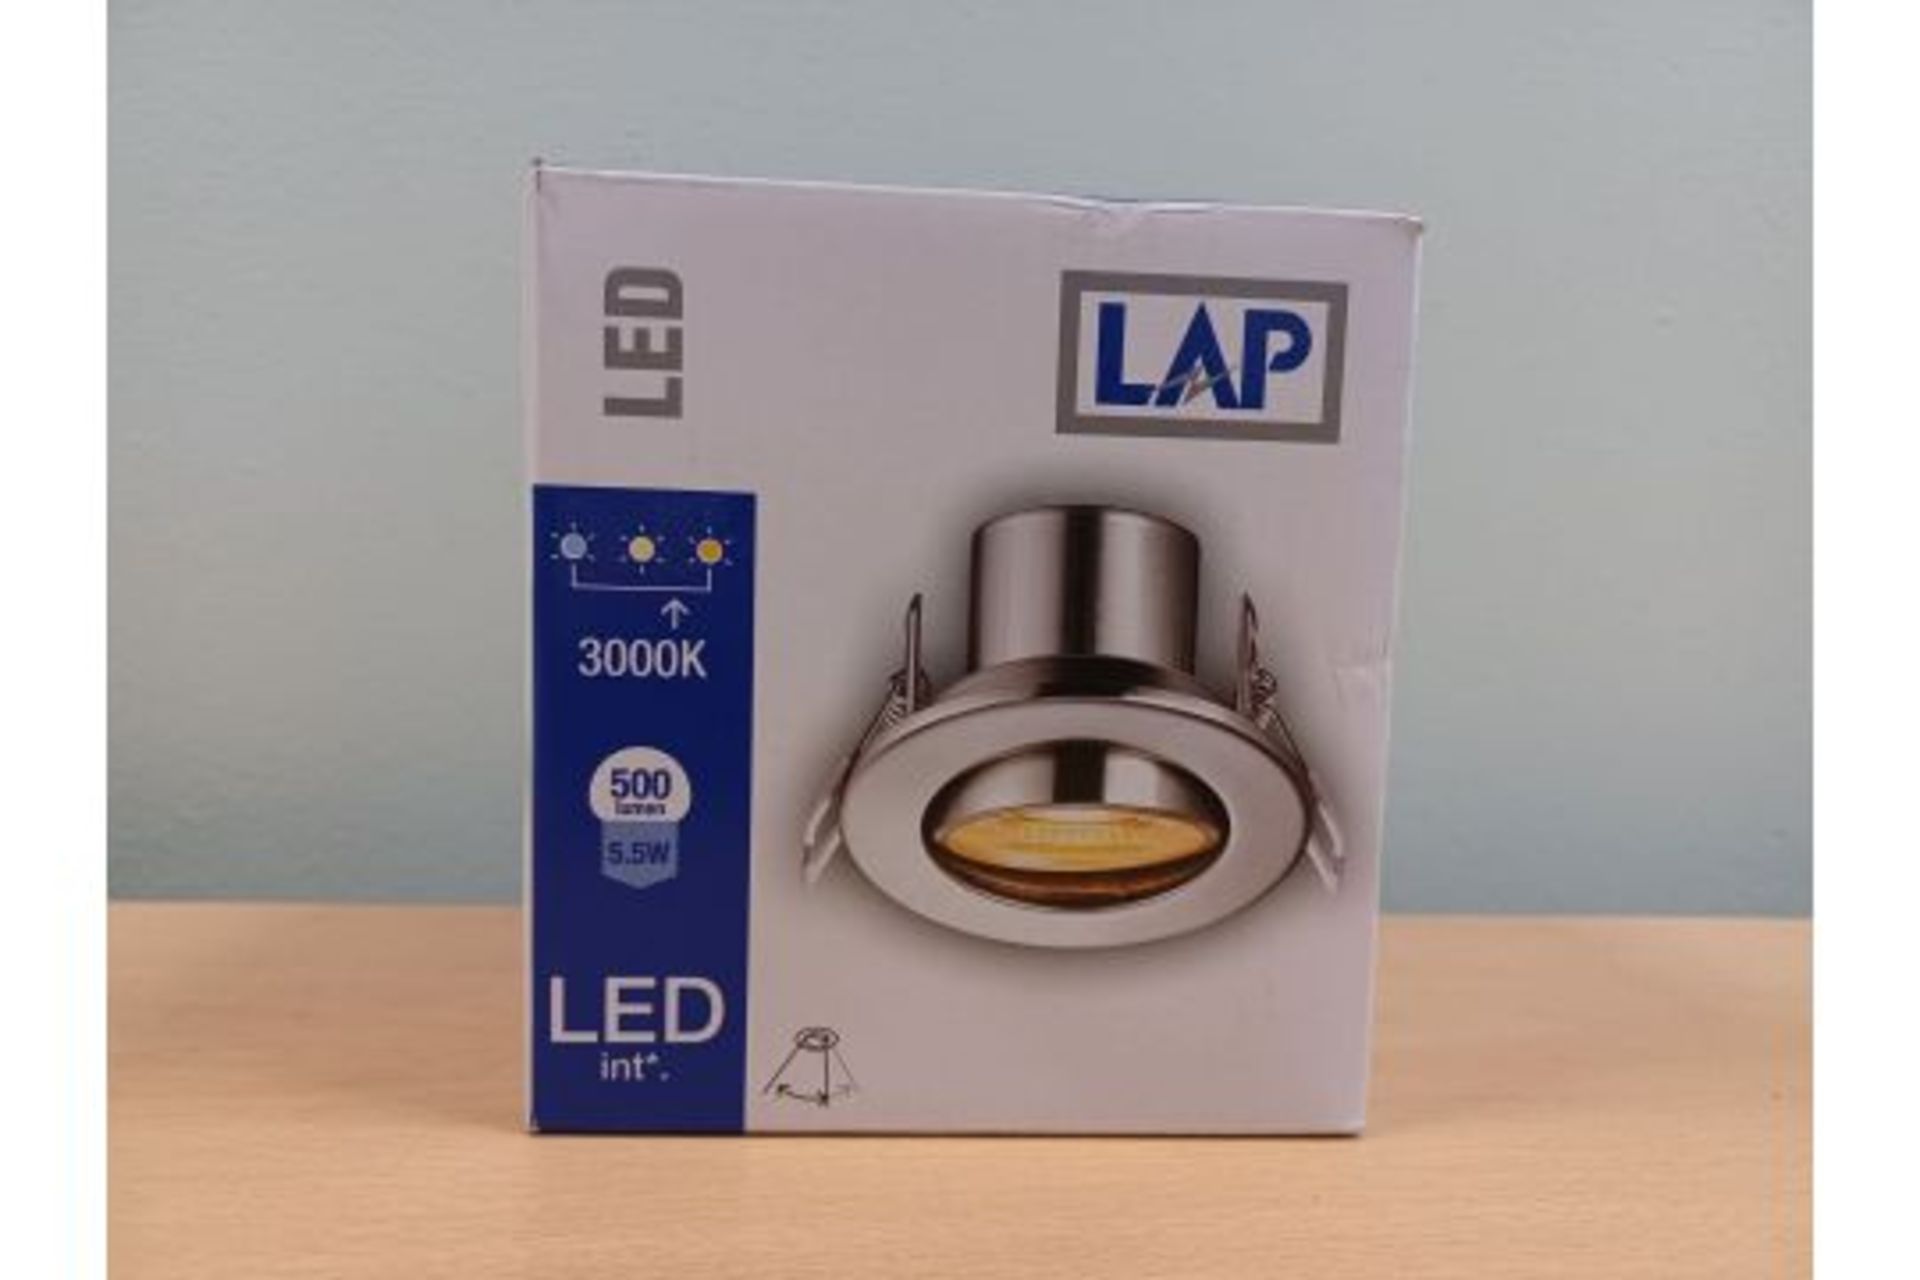 PALLET TO CONTAIN 420 X NEW BOXED LAP SATIN LED DOWNLIGHTS. 500 LUMEN. 5.5W. 3000K. TILTABLE (ROW